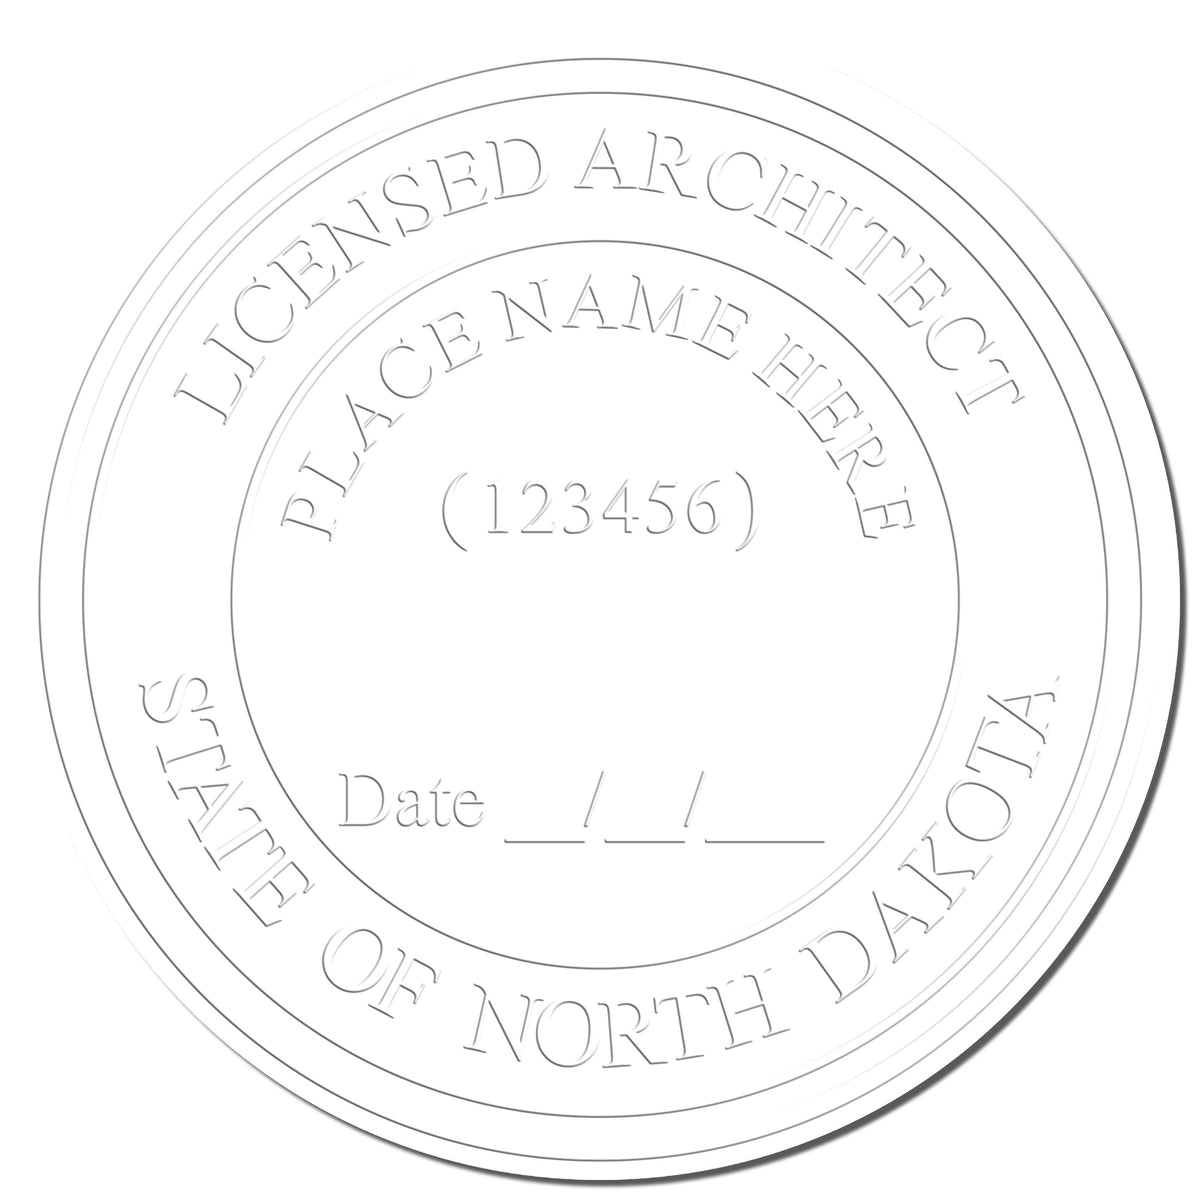 This paper is stamped with a sample imprint of the Hybrid North Dakota Architect Seal, signifying its quality and reliability.